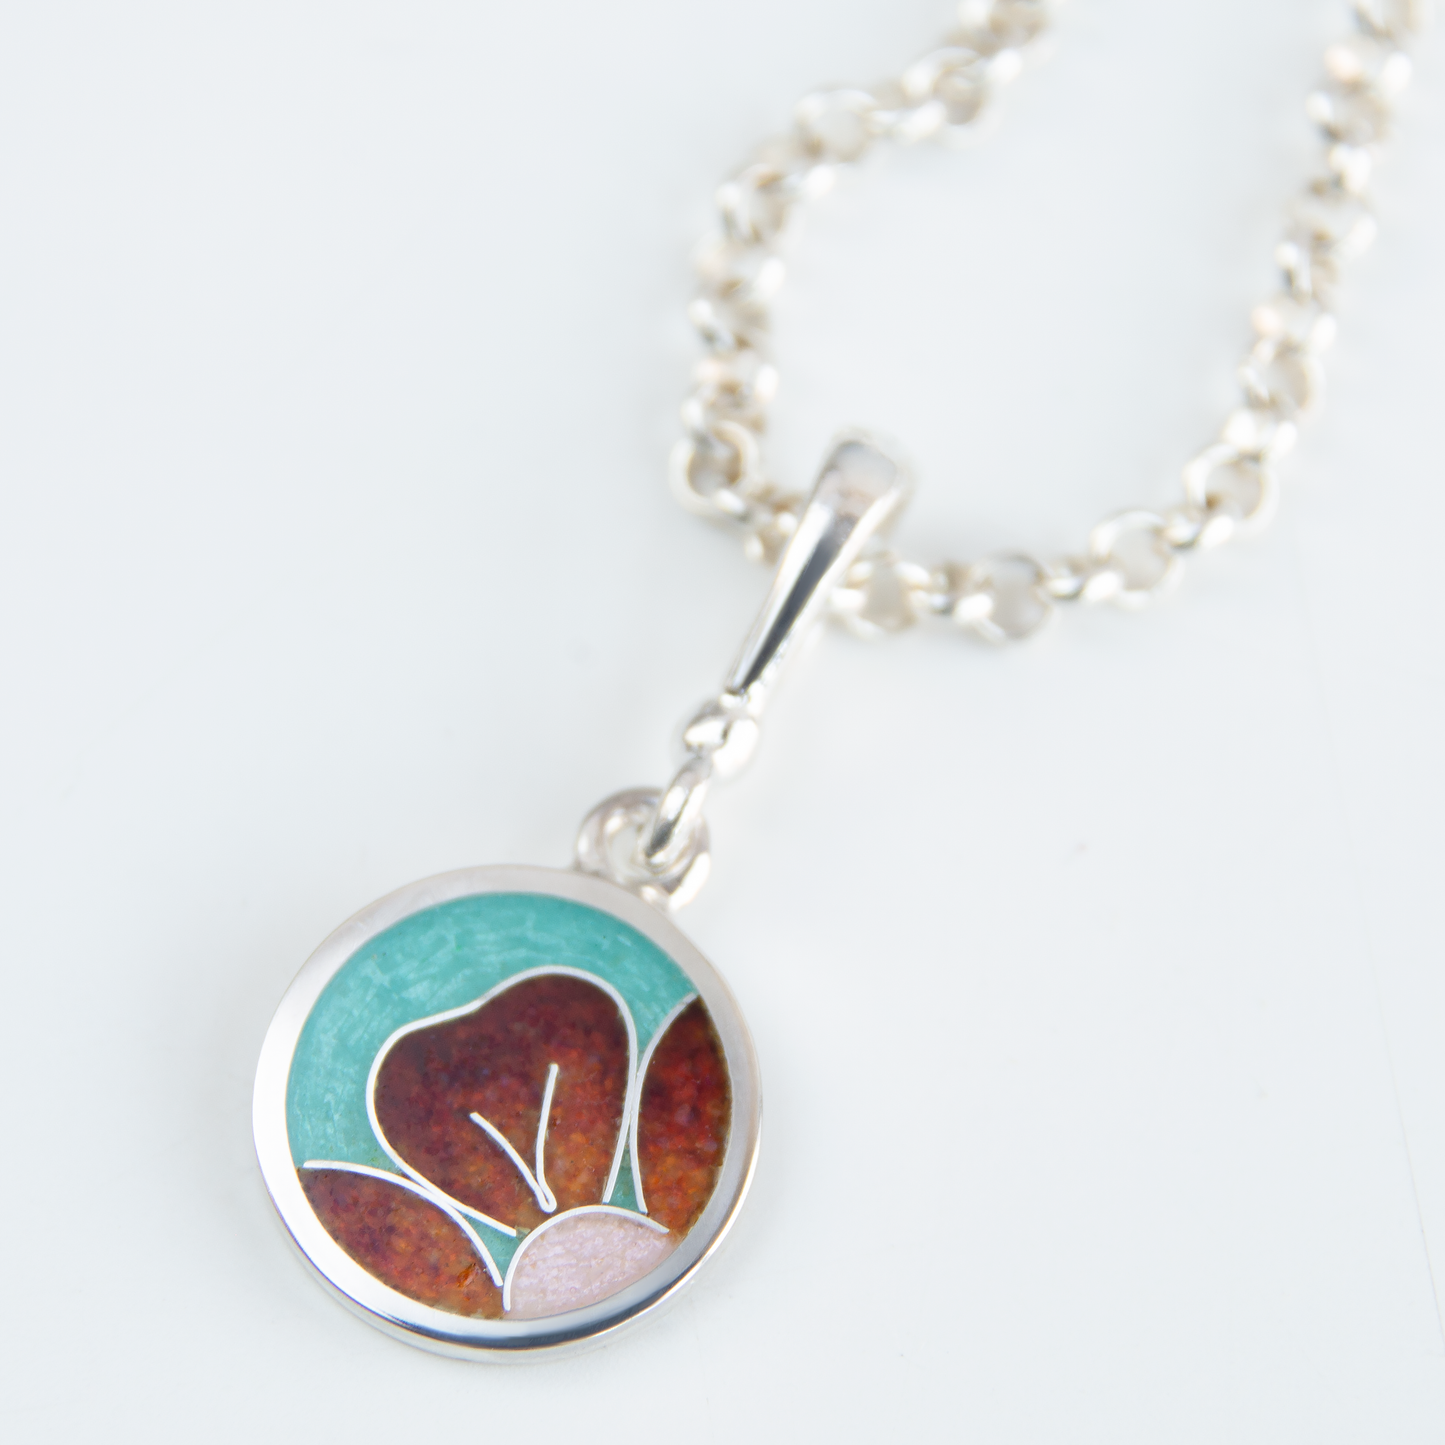 Round Small Enamel Necklace With Red Flower